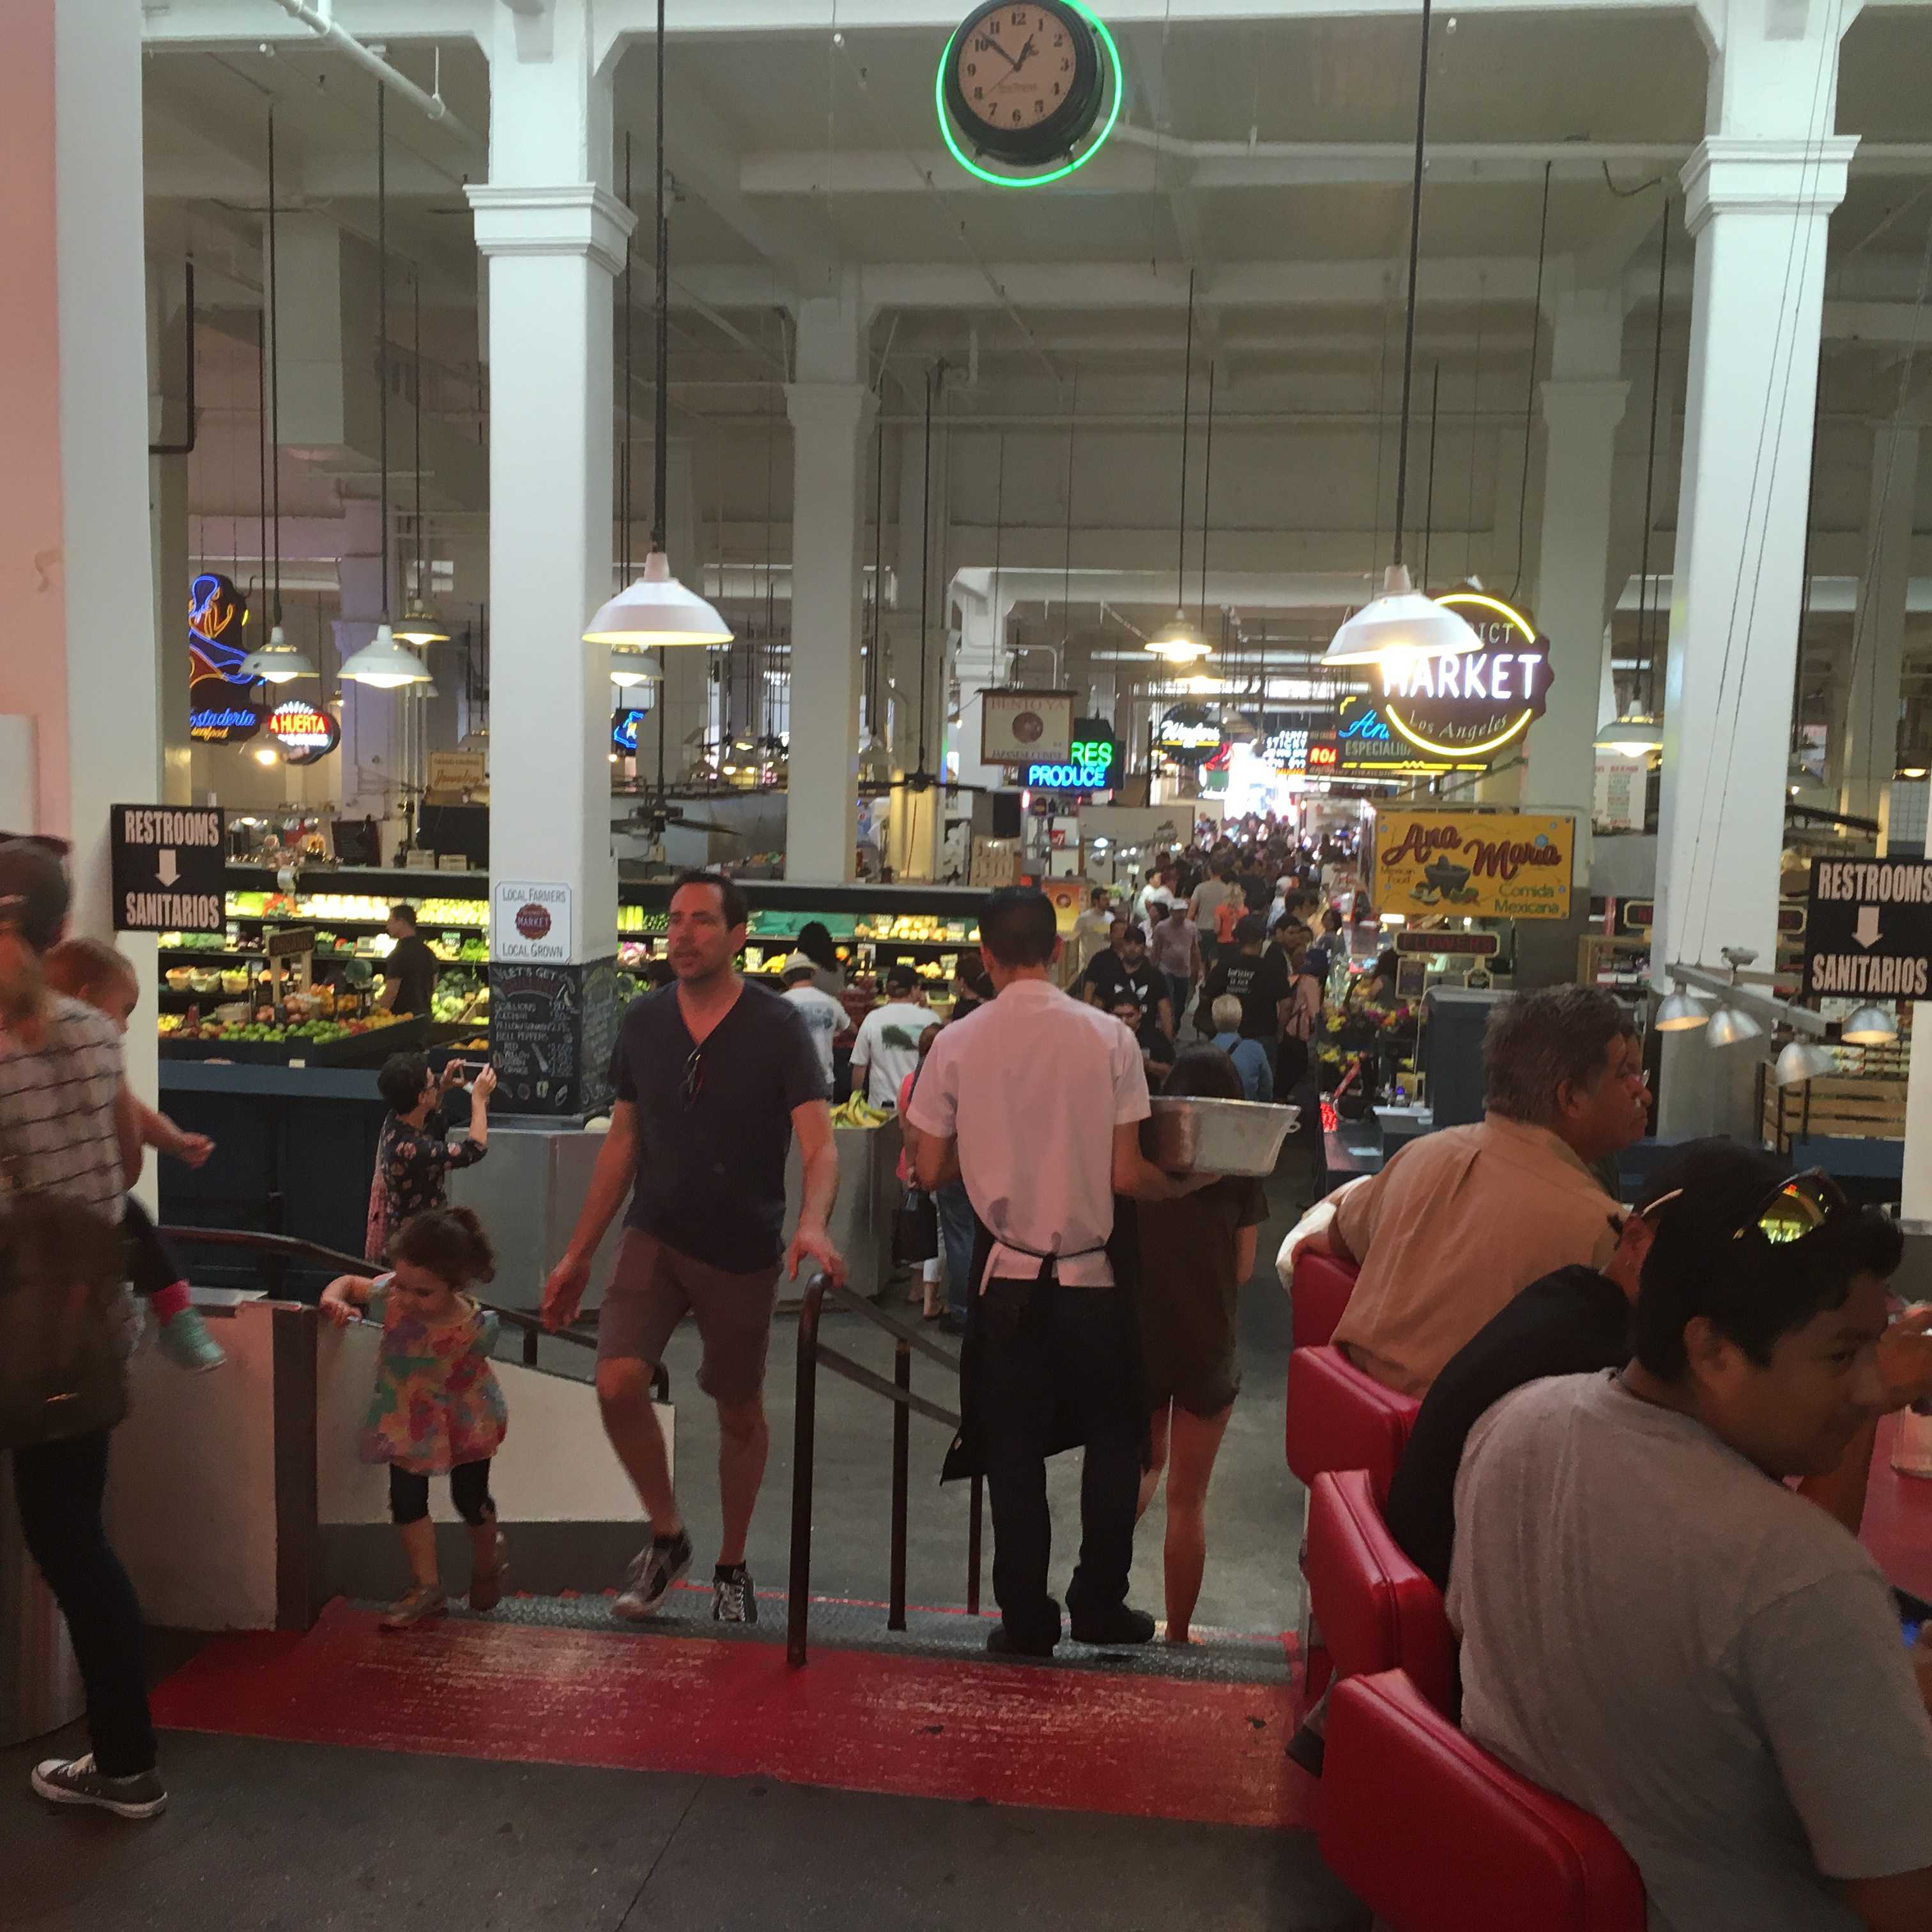 The interior of Grand Central is lined with various food vendors